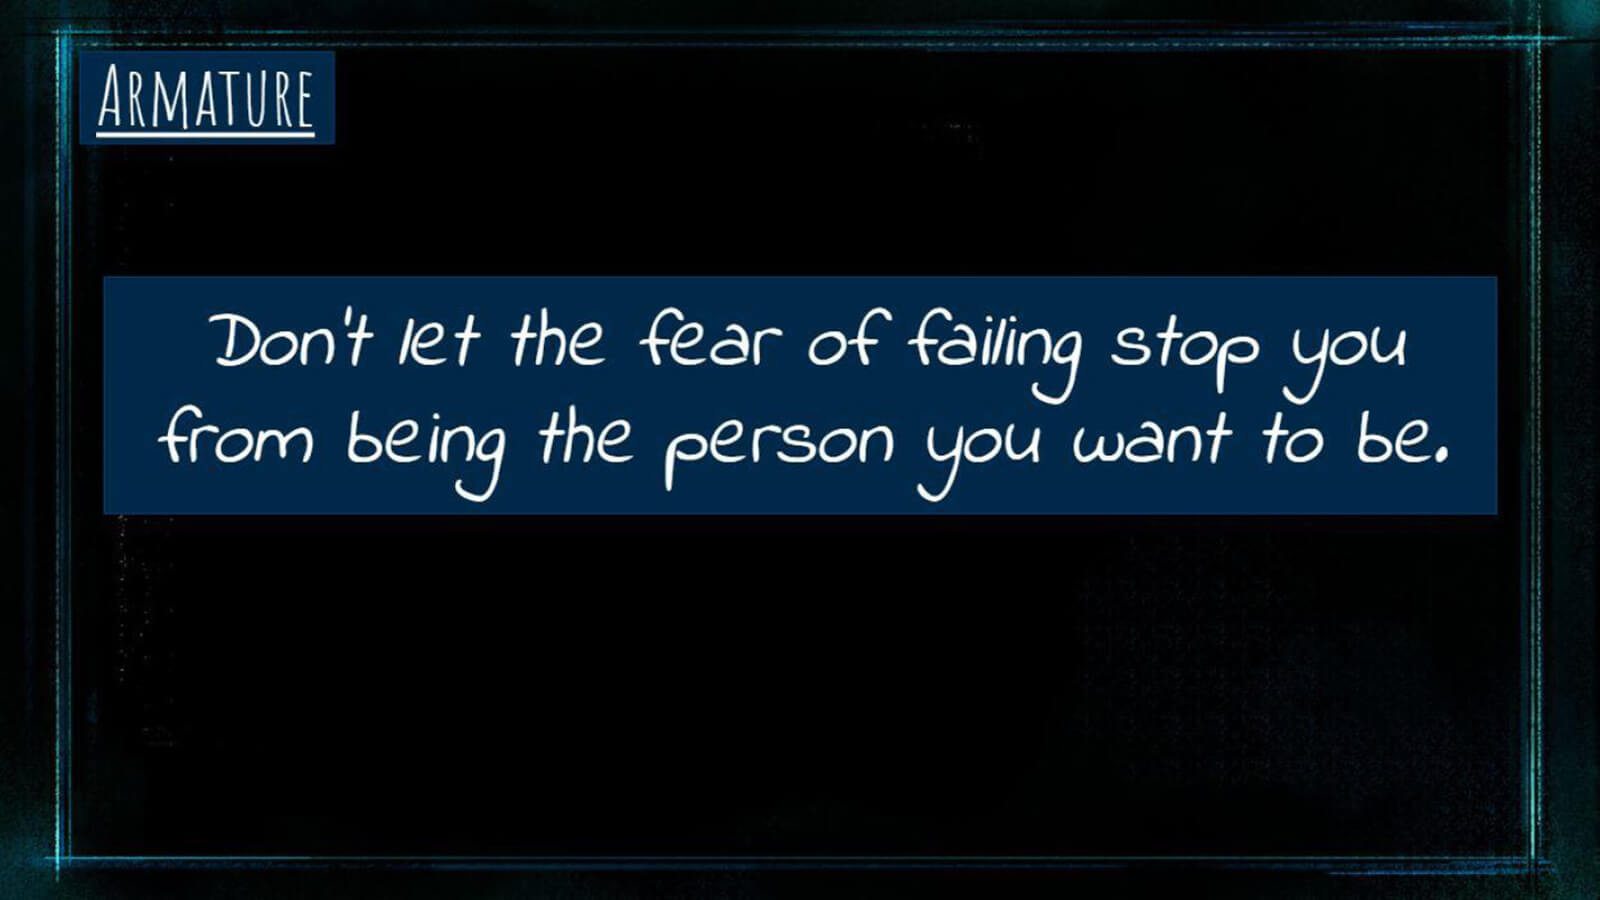 A slide labeled "Armature" with the phrase "Don't let the fear of failing stop you from being the person you want to be." 